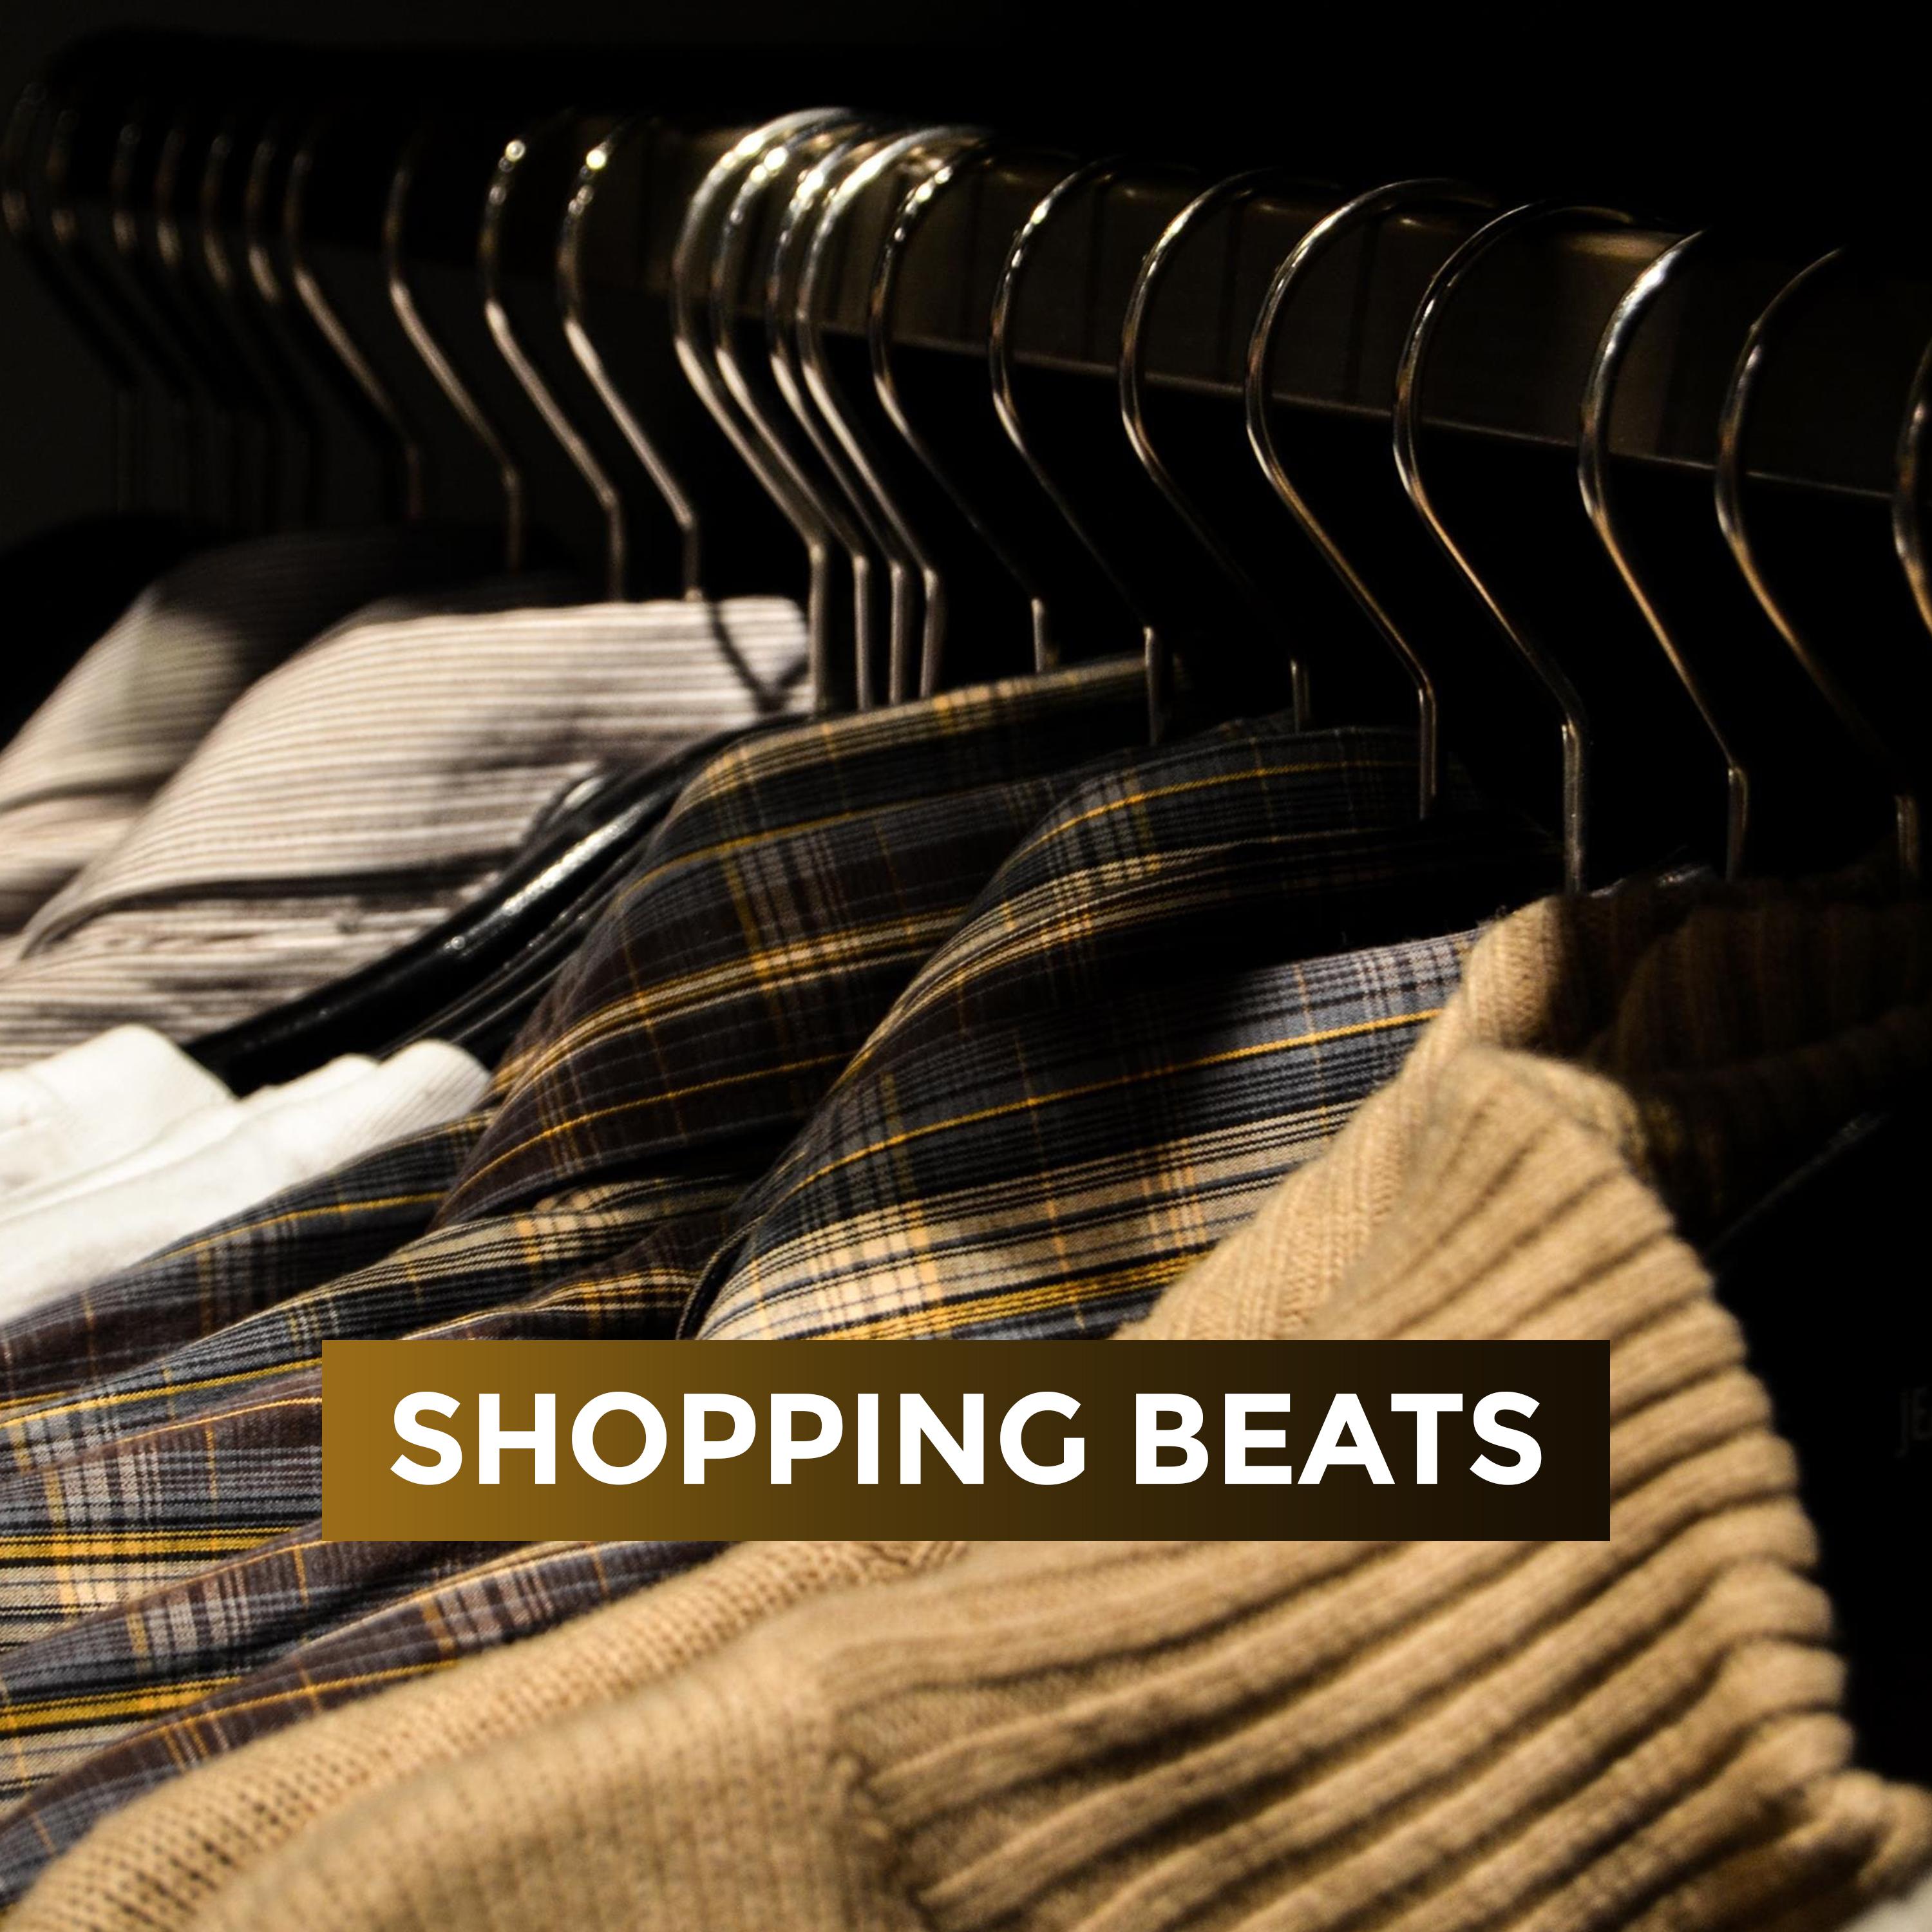 Shopping Beats – Chillout Collections 2019, Best Music for Shop, Fashion Beats After Work, Lounge Music